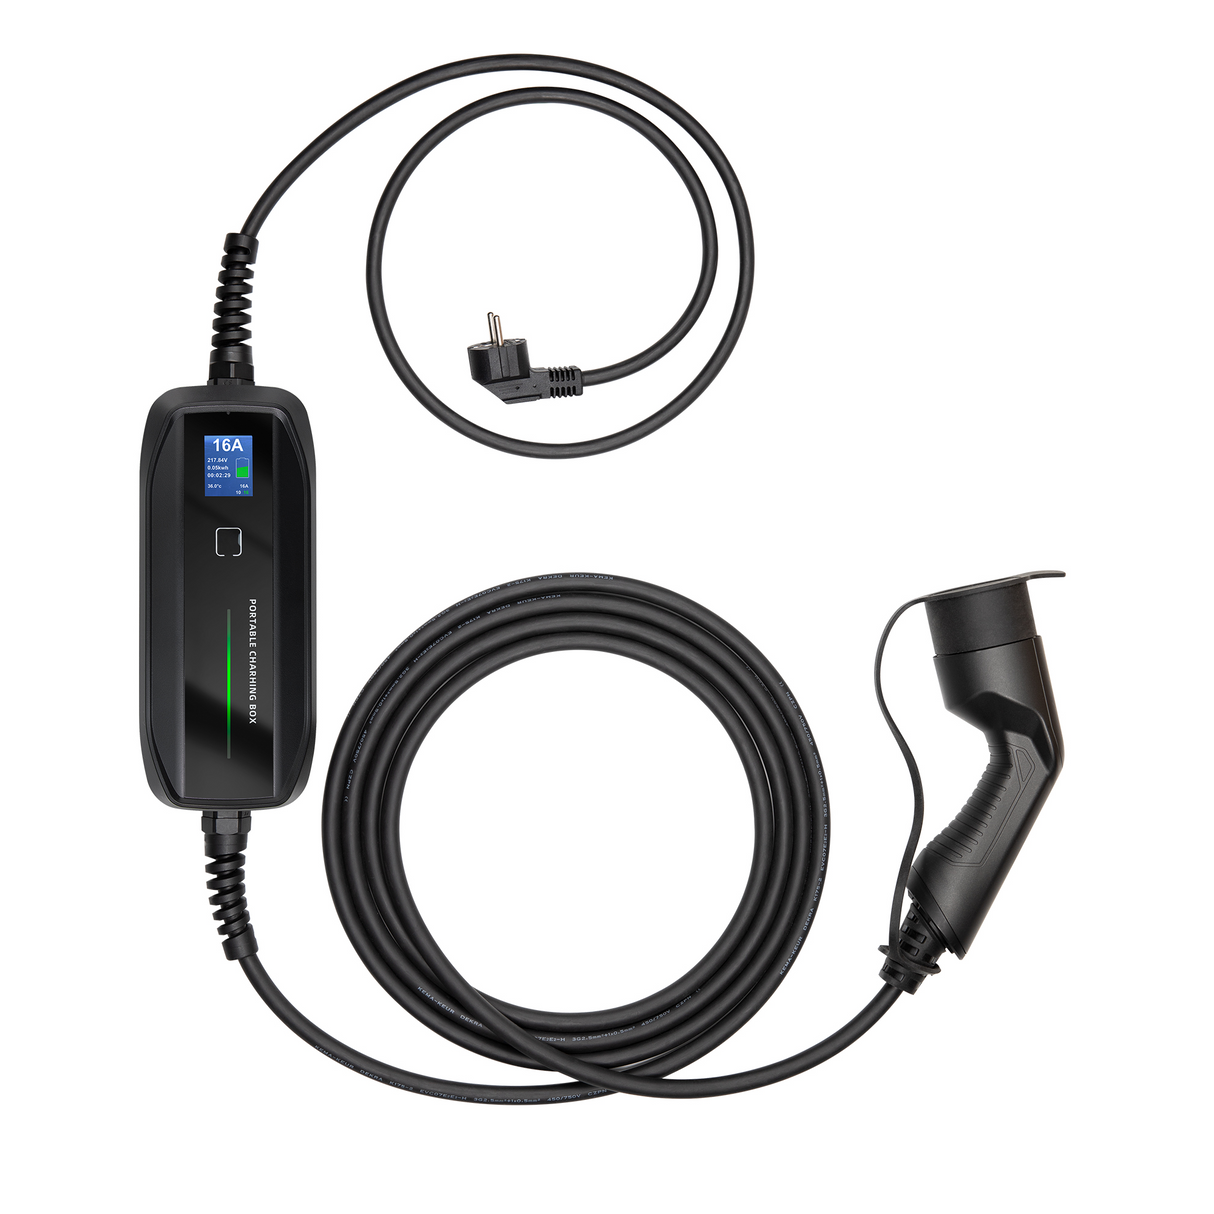 Mobile Charger Mini Countryman - Bersen with LCD - Type 2 to Schuko